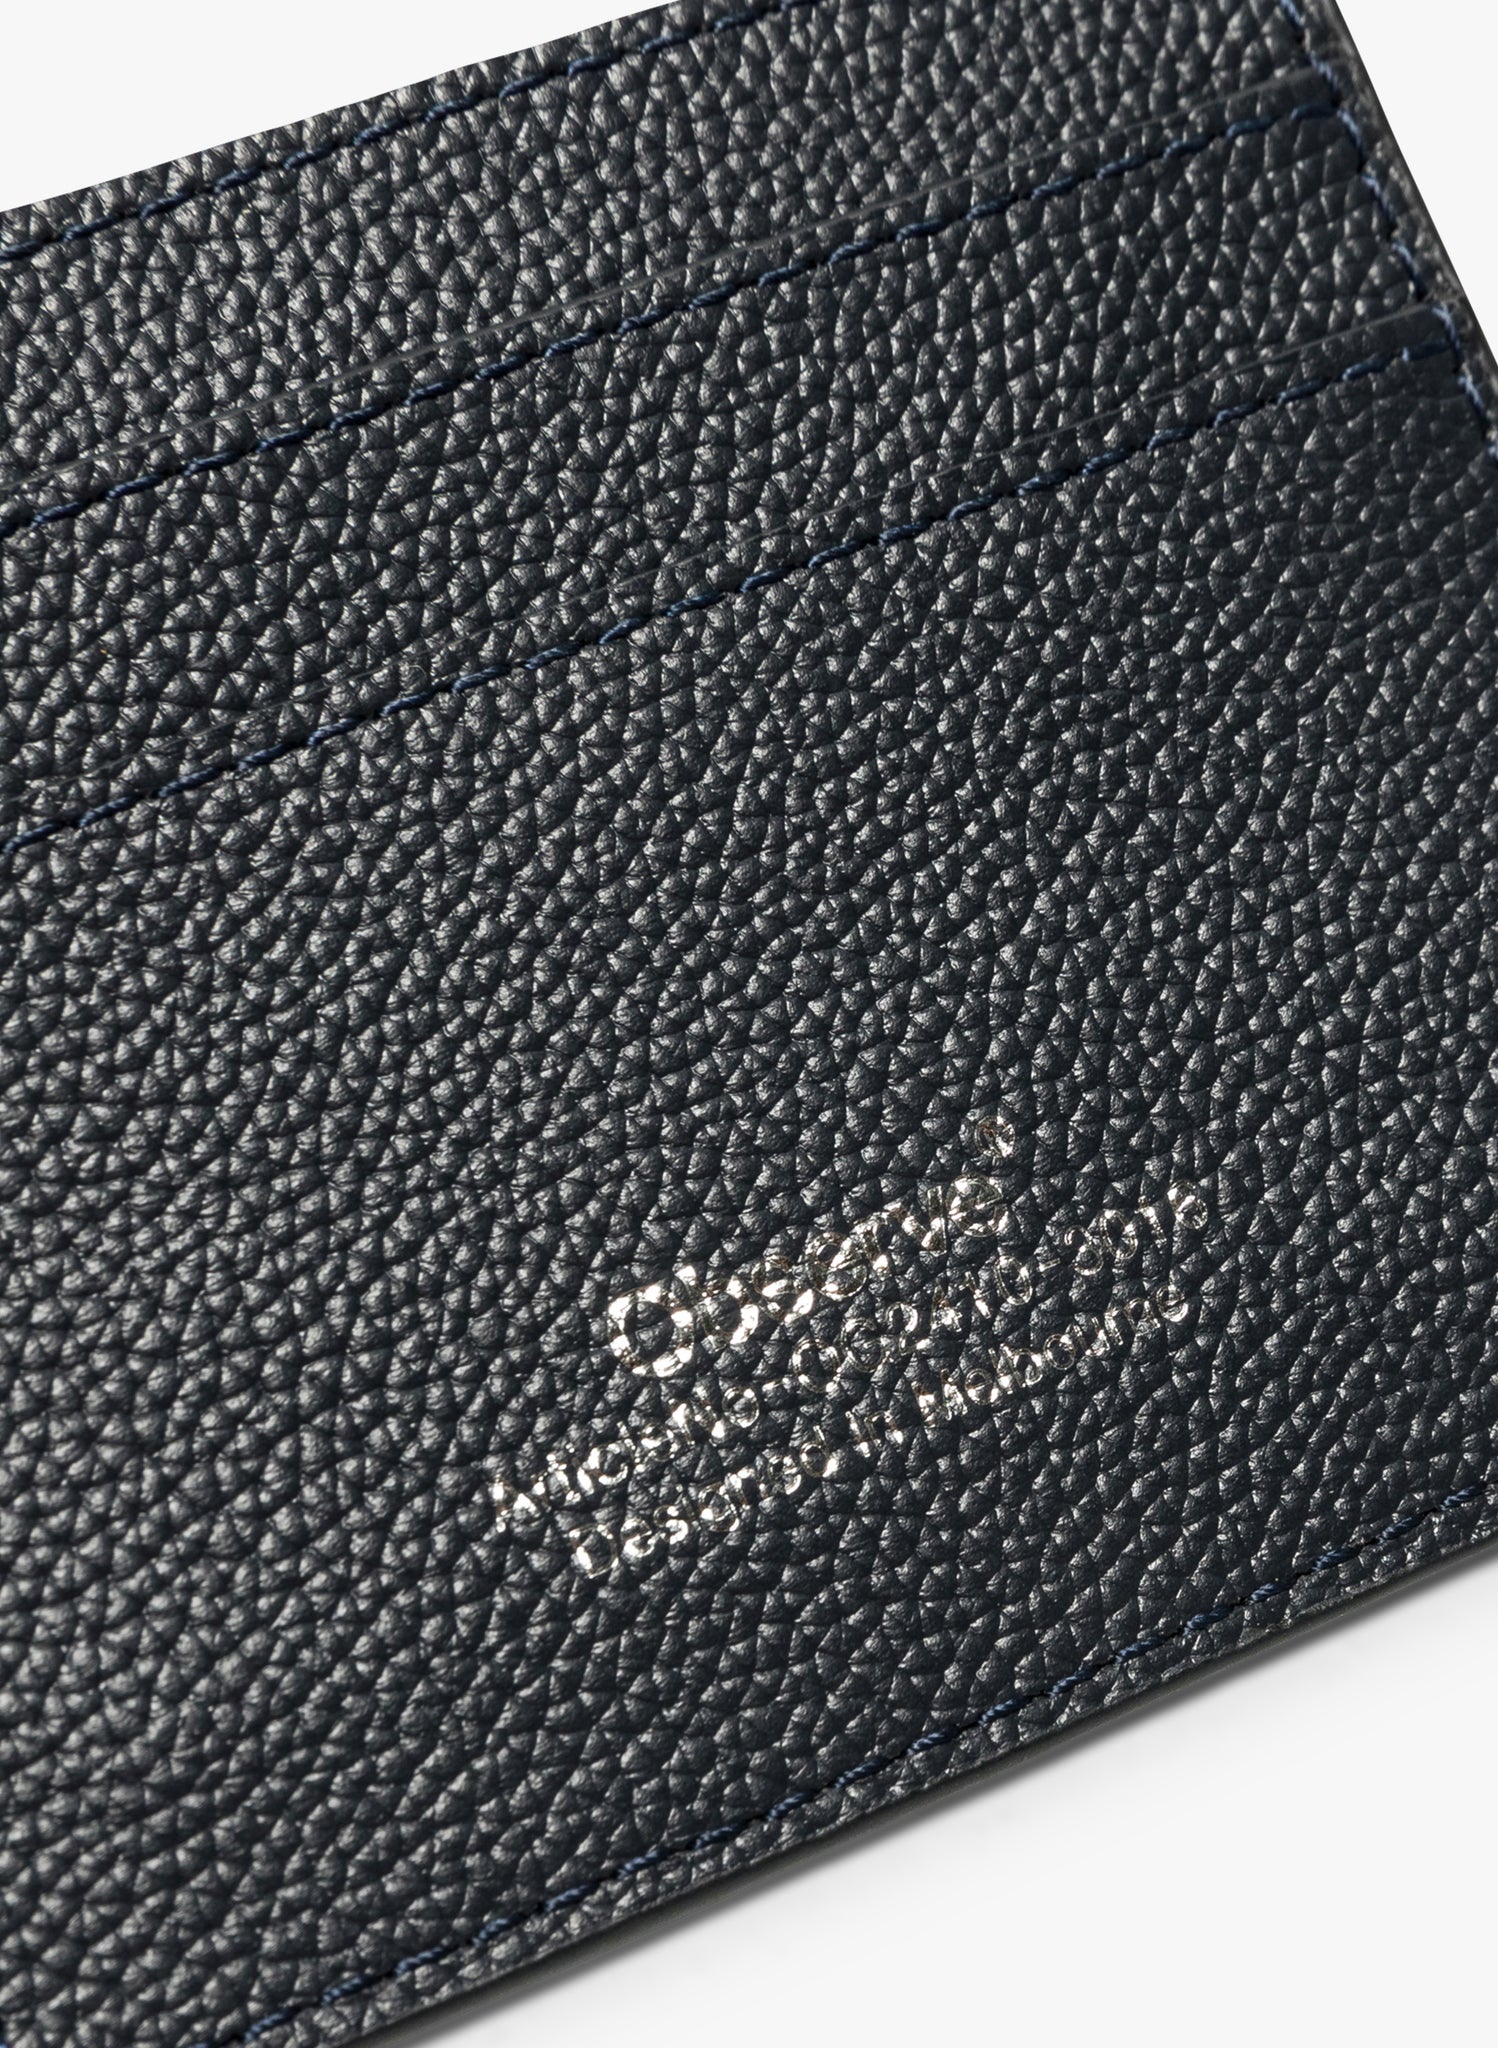 Leather Card Holder - Navy